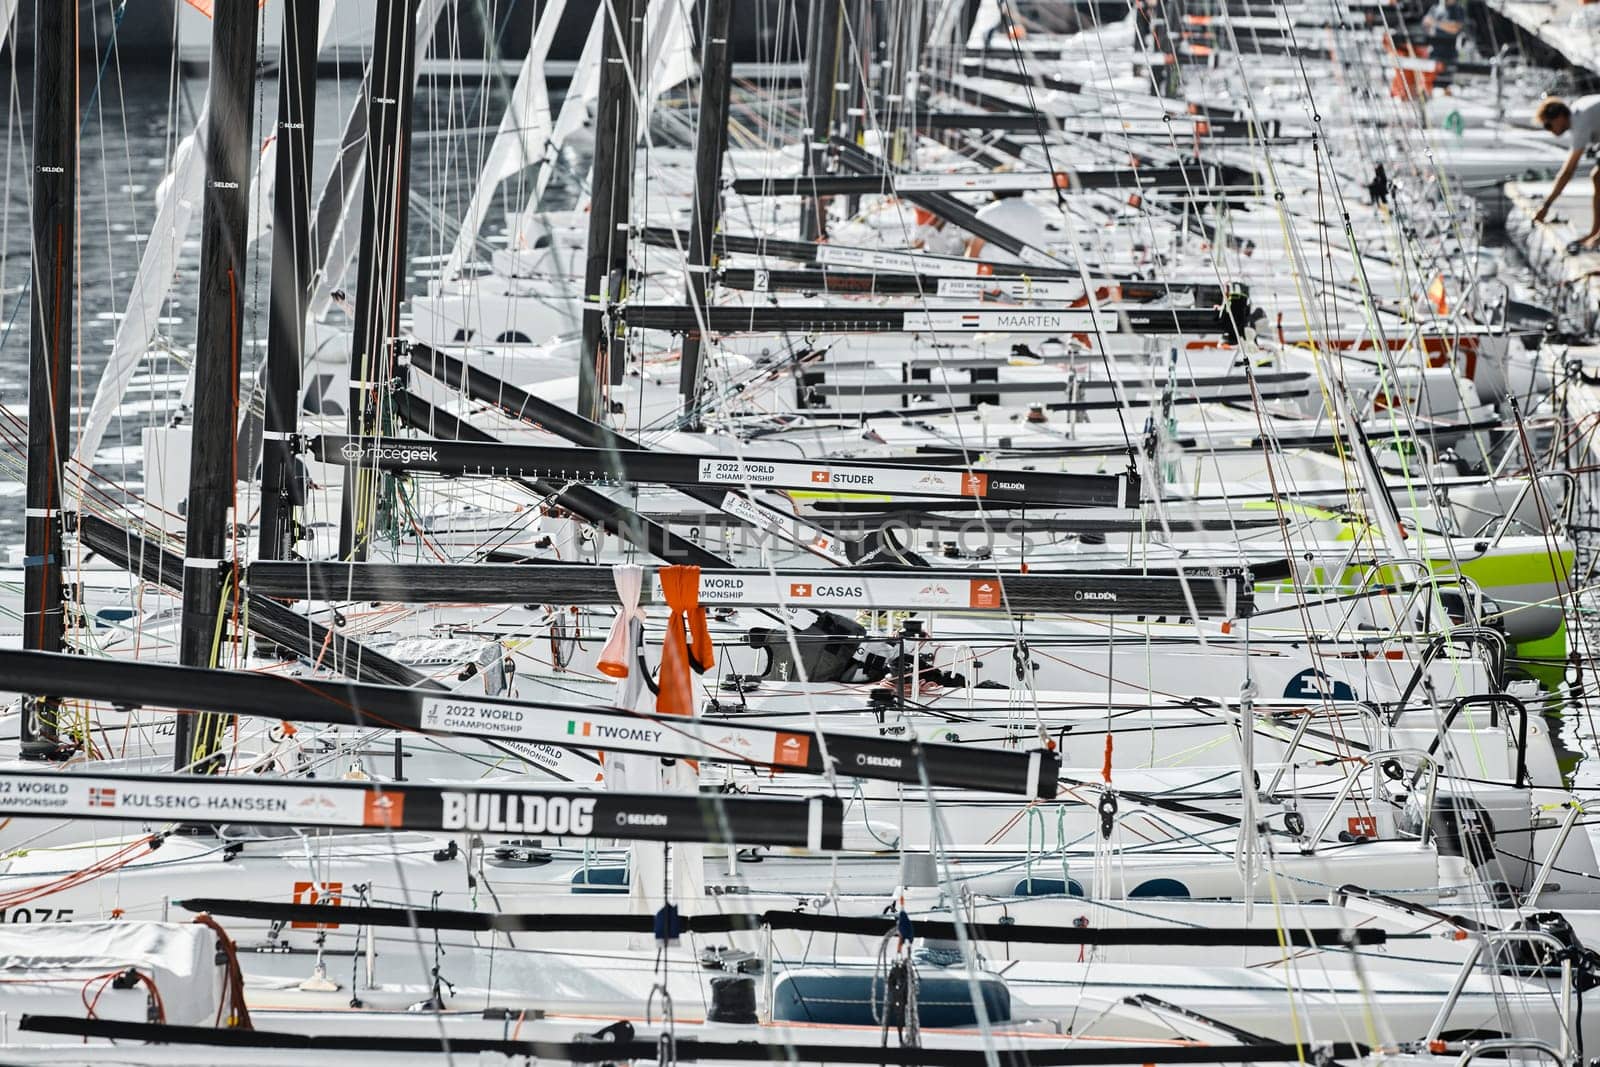 Monaco, Monte-Carlo, 18 October 2022: many sailing boats of the World Championship of J70 class participants stand in a row waiting for the wind for the stage of the sailing race. High quality photo